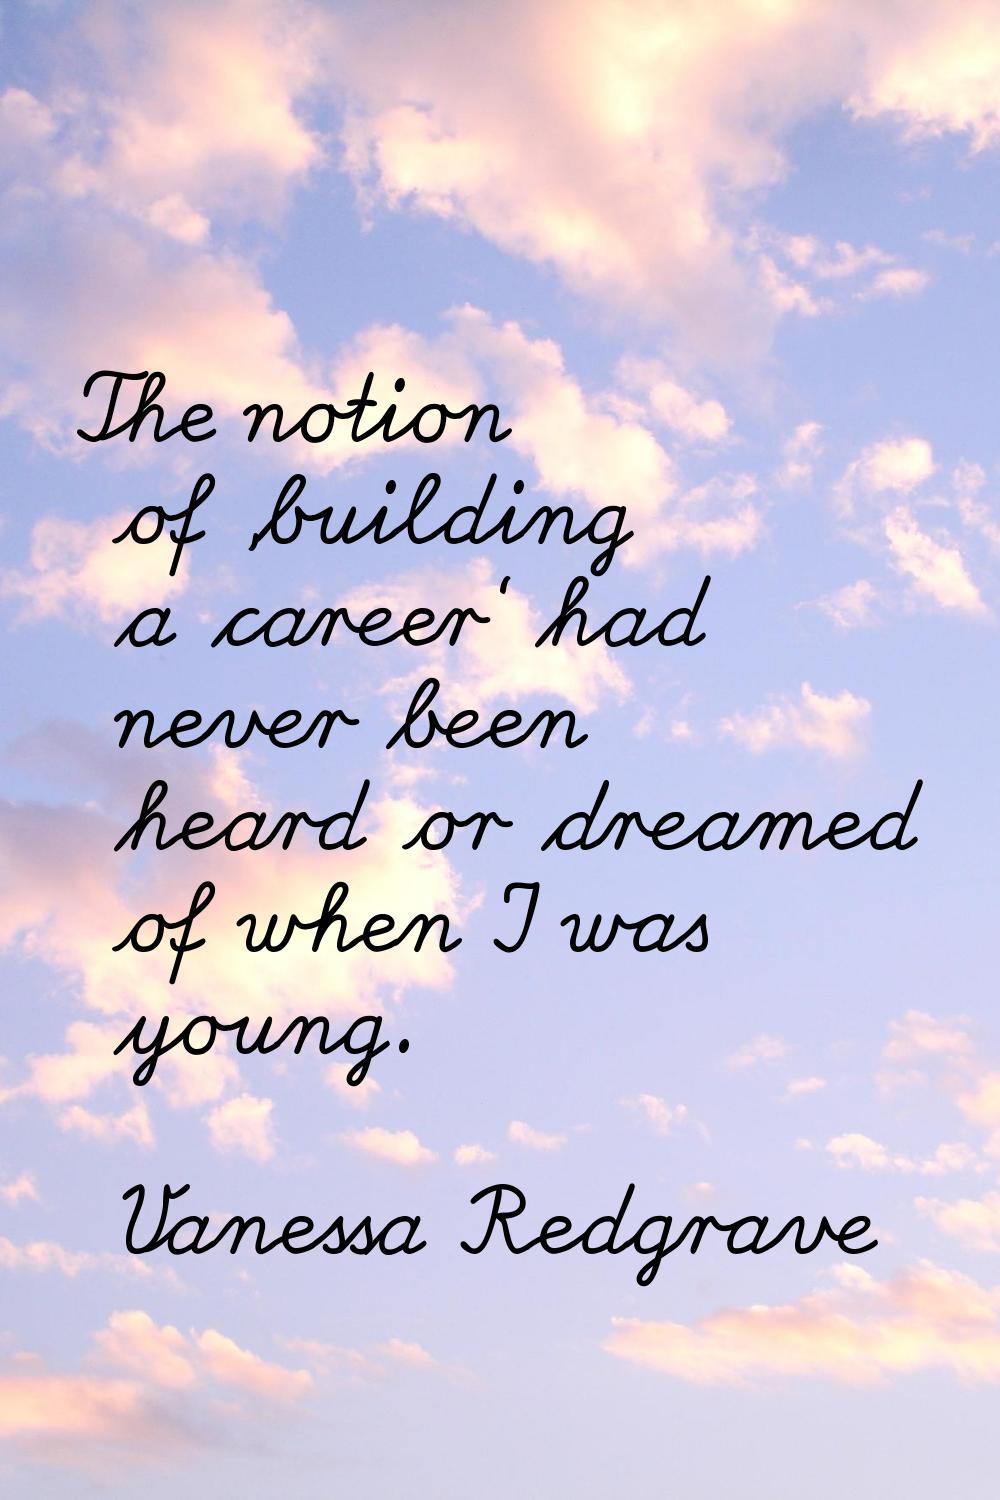 The notion of 'building a career' had never been heard or dreamed of when I was young.